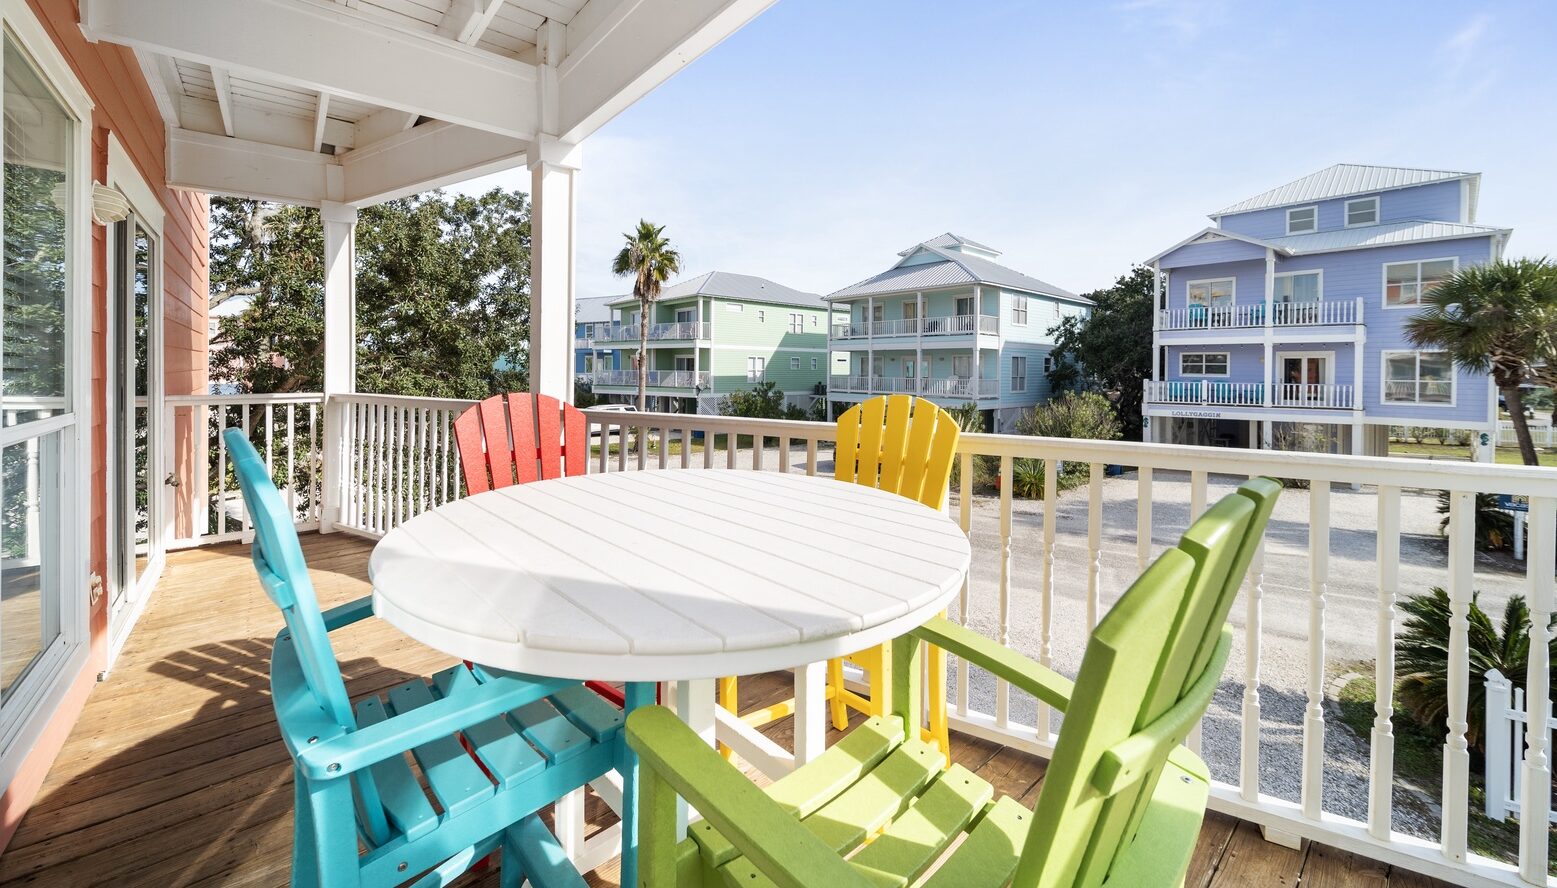 7 Easy Ways to Make Your Vacation Rental…